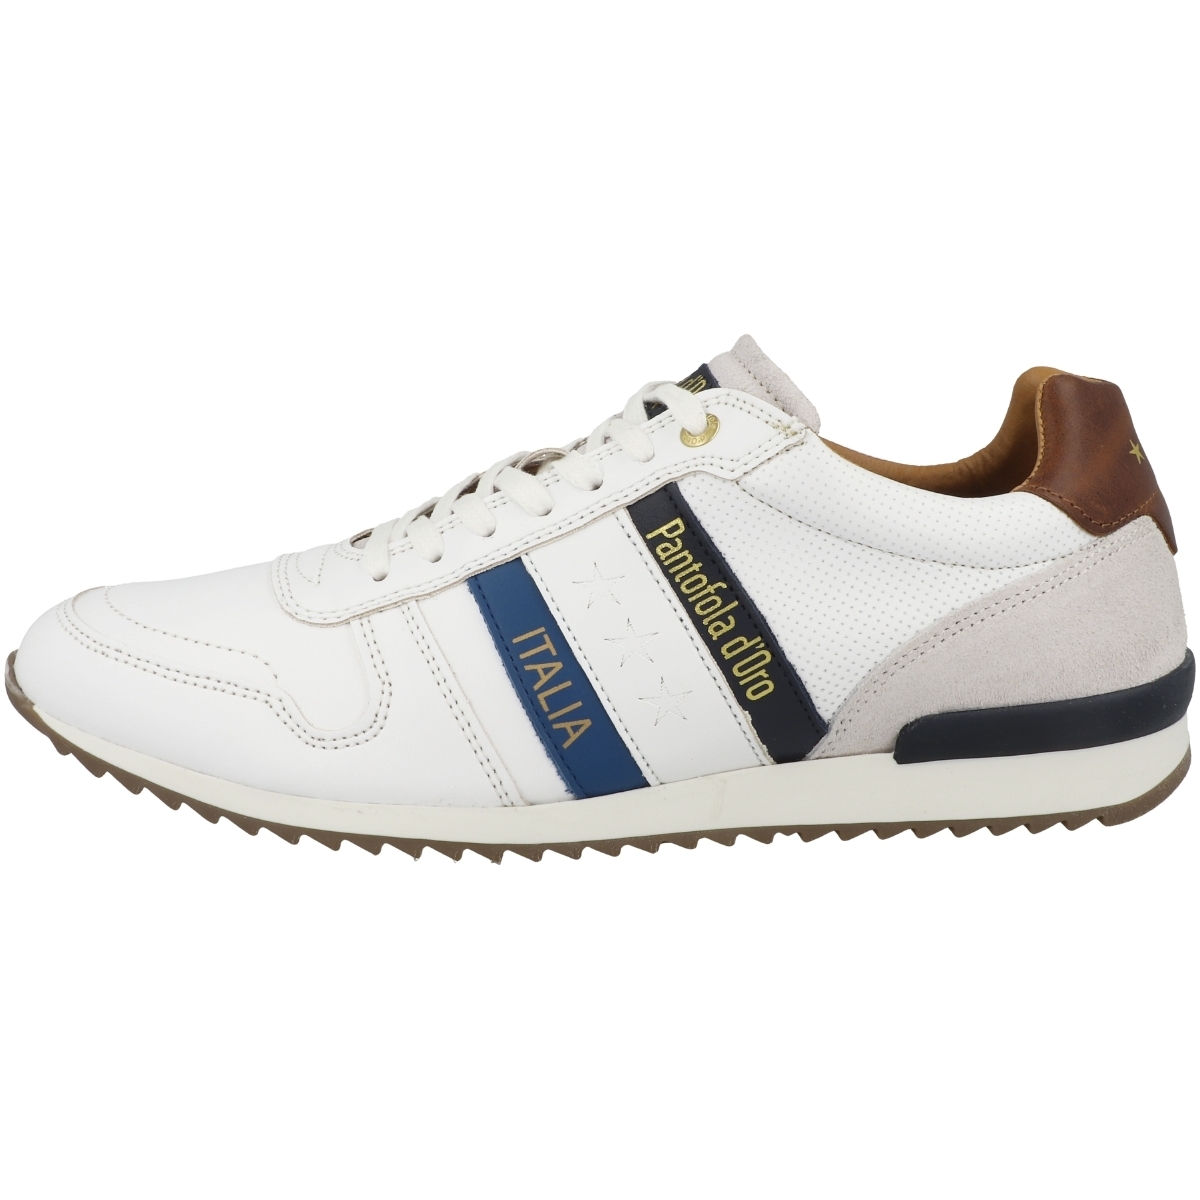 Pantofola d'Oro Rizza Uomo Low Sneaker low weiss